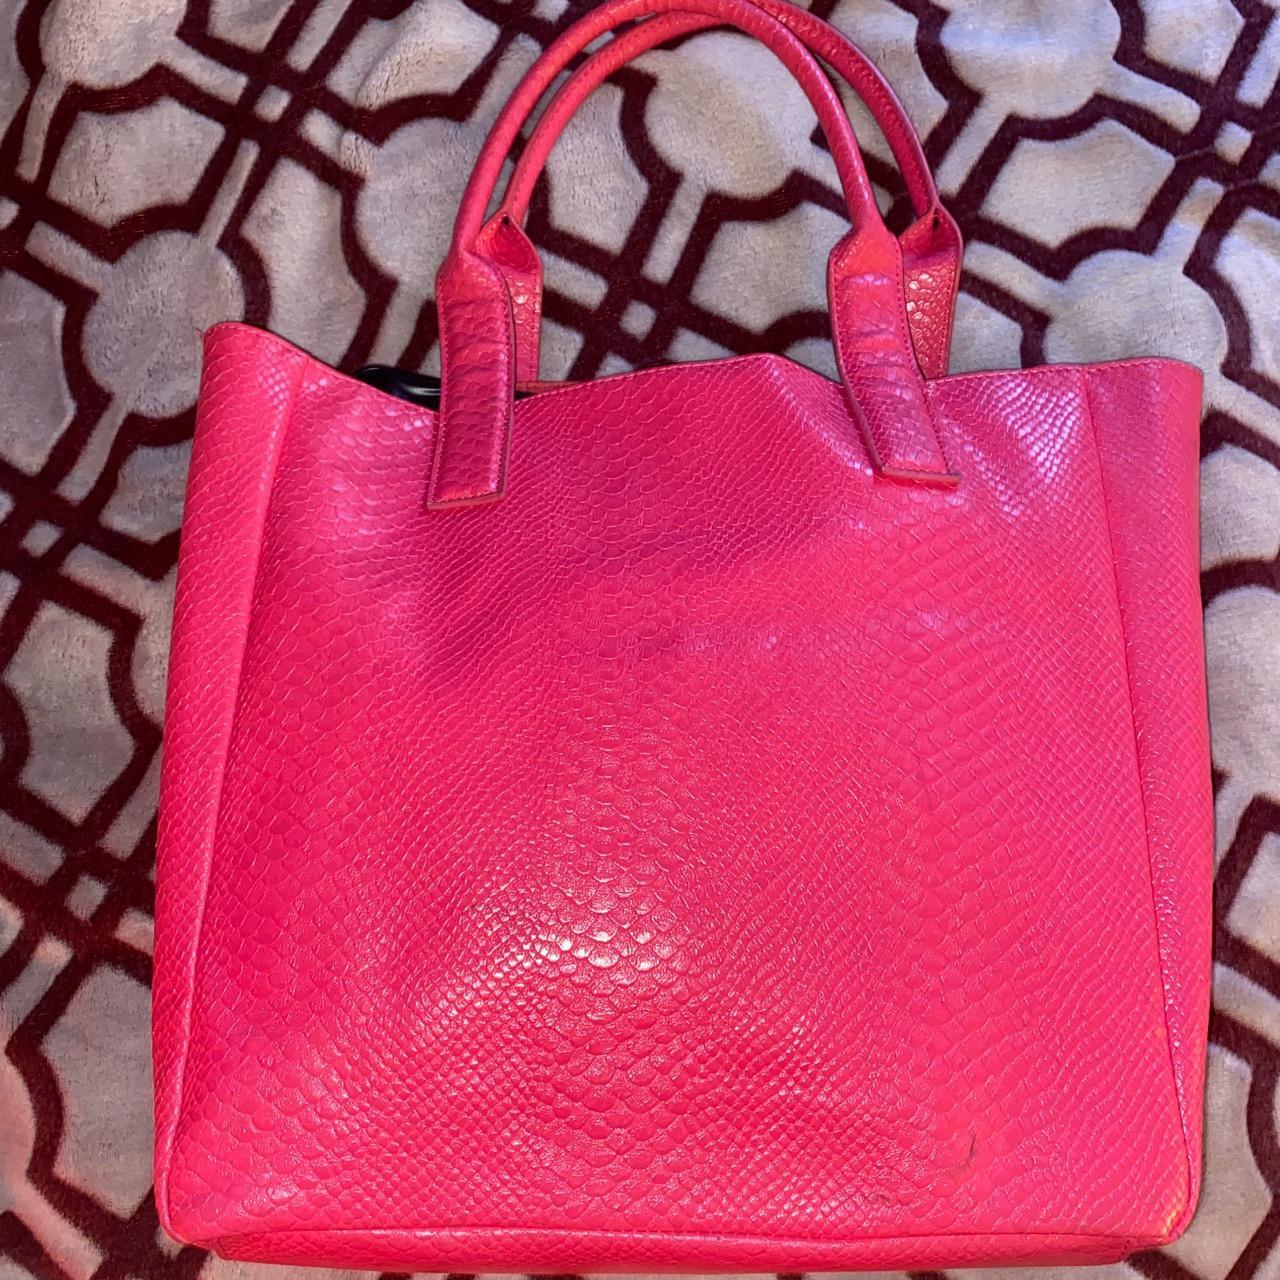 Eddie Borgo for Neiman Marcus Laser Cut Jelly Cosmetic Tote Bag Pink Purse  | eBay